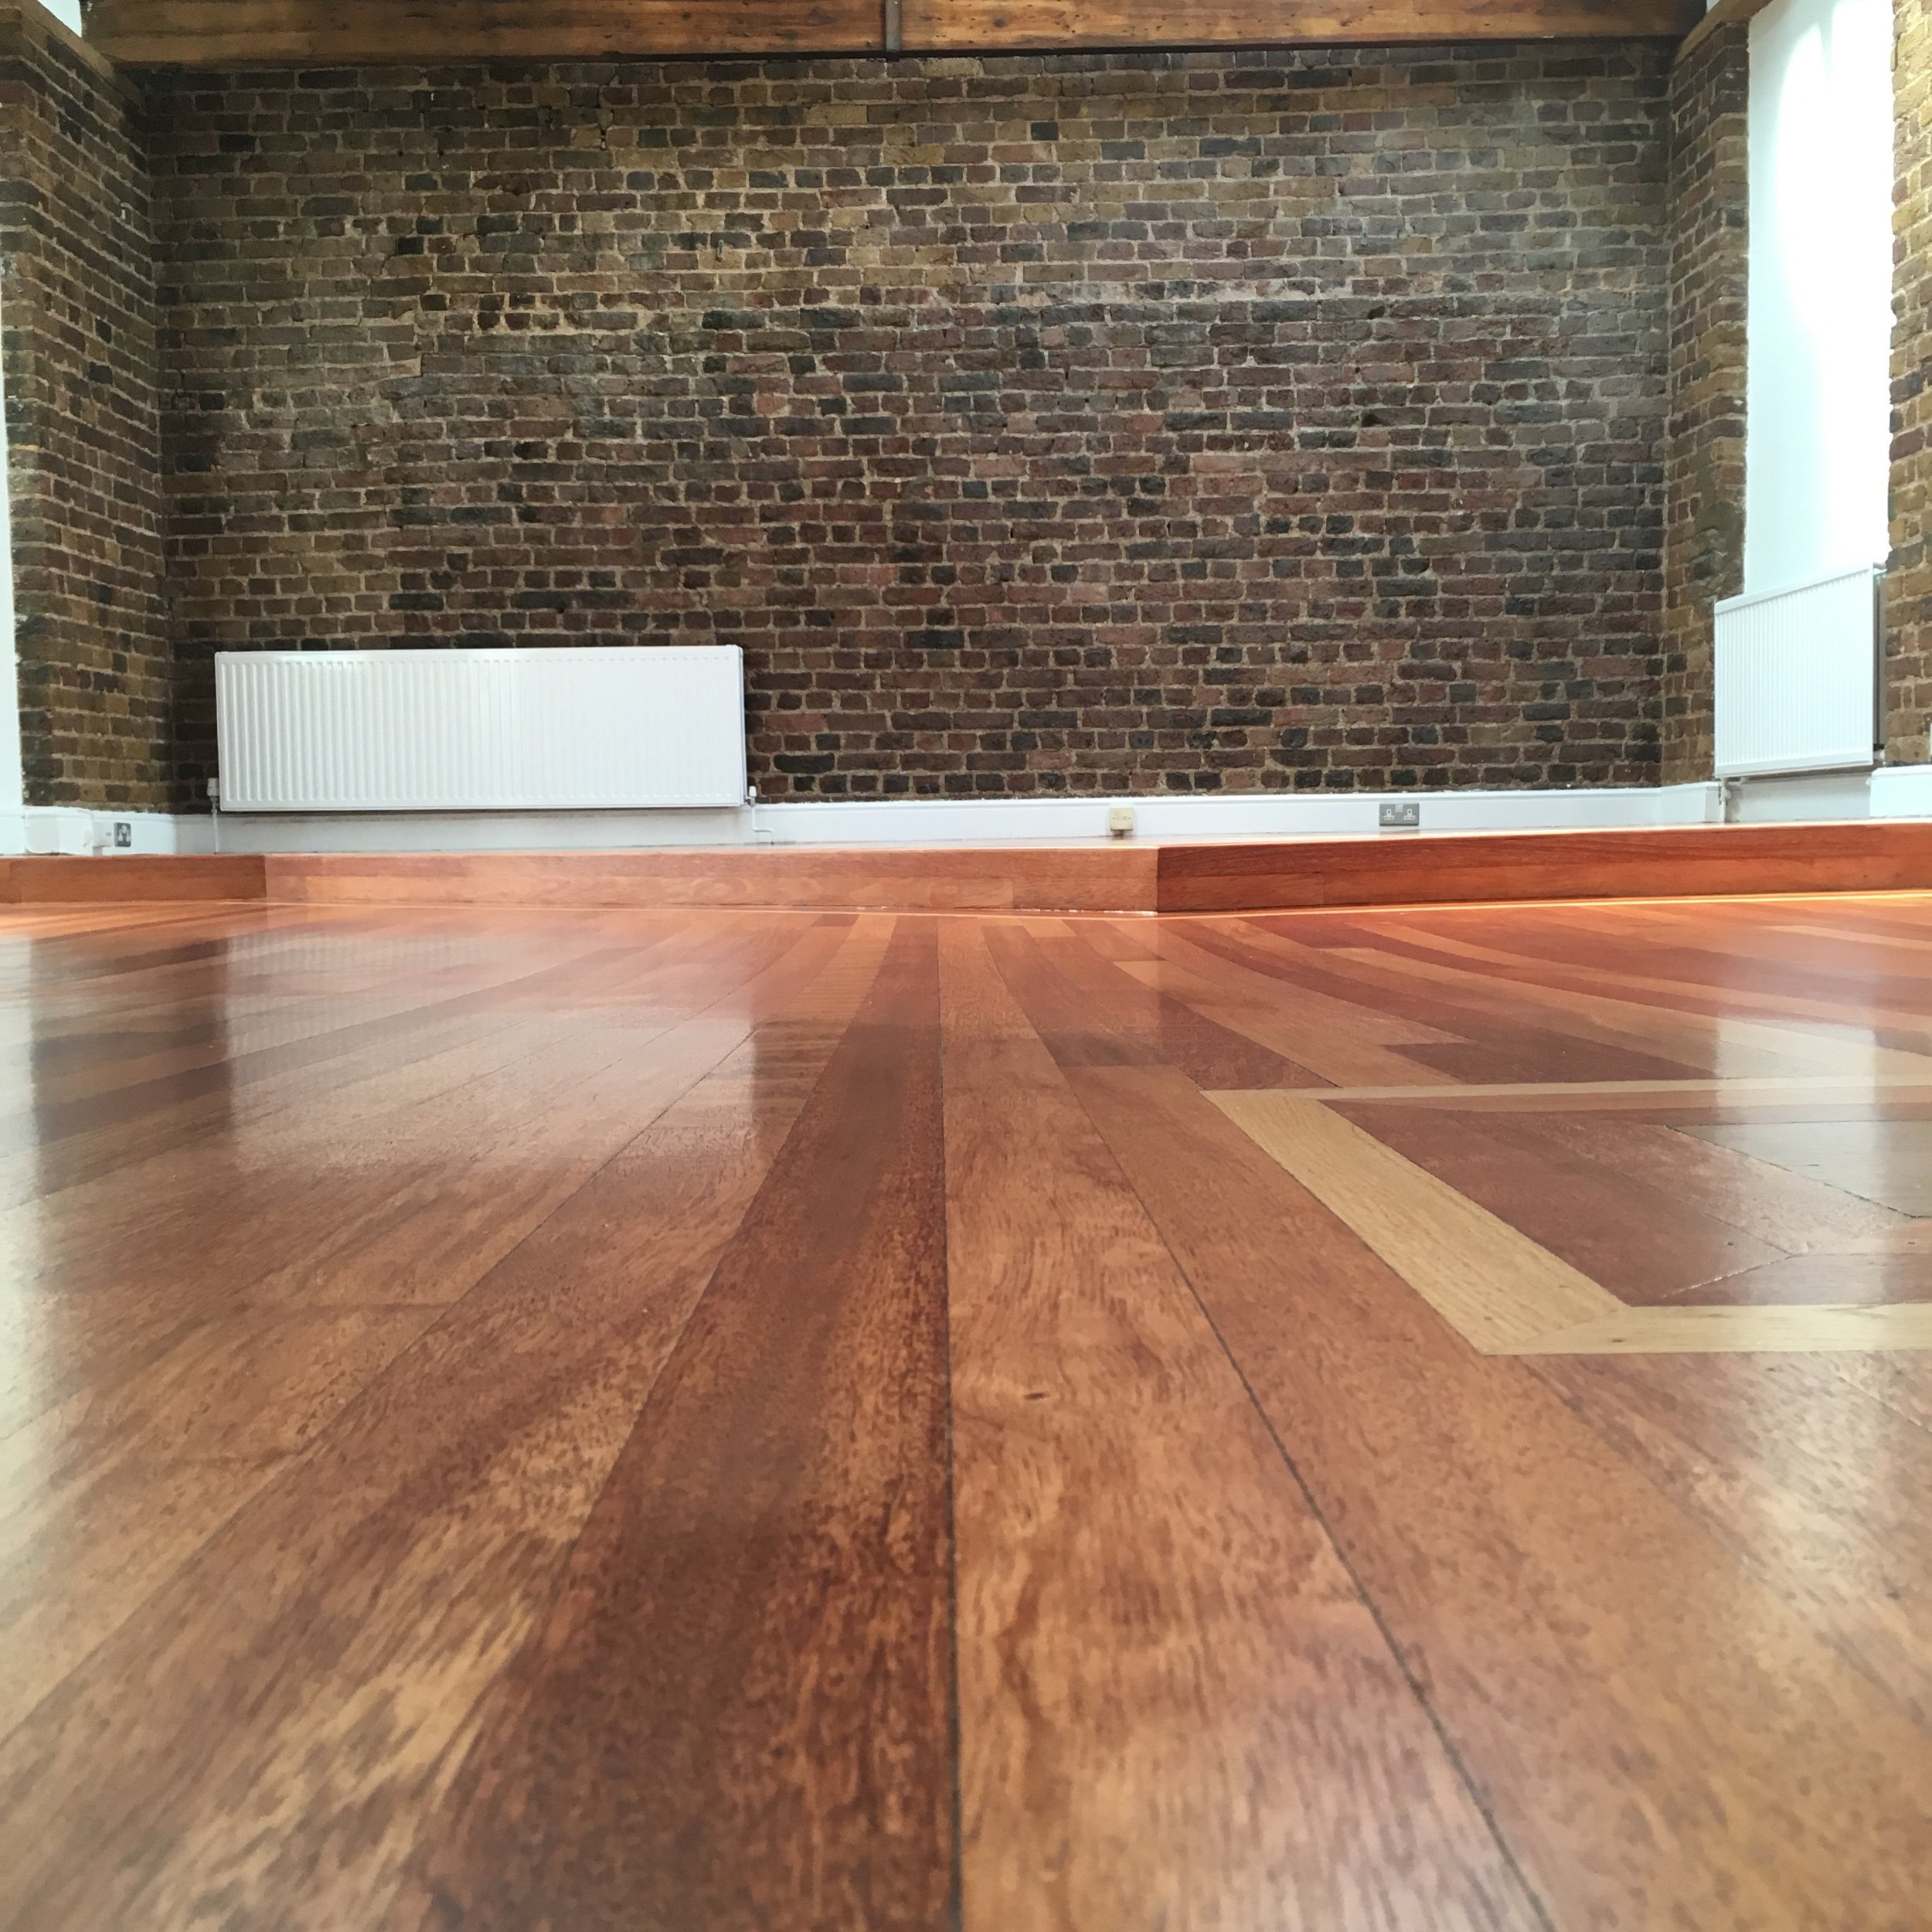 Mahogany floor finished with water based lacquer